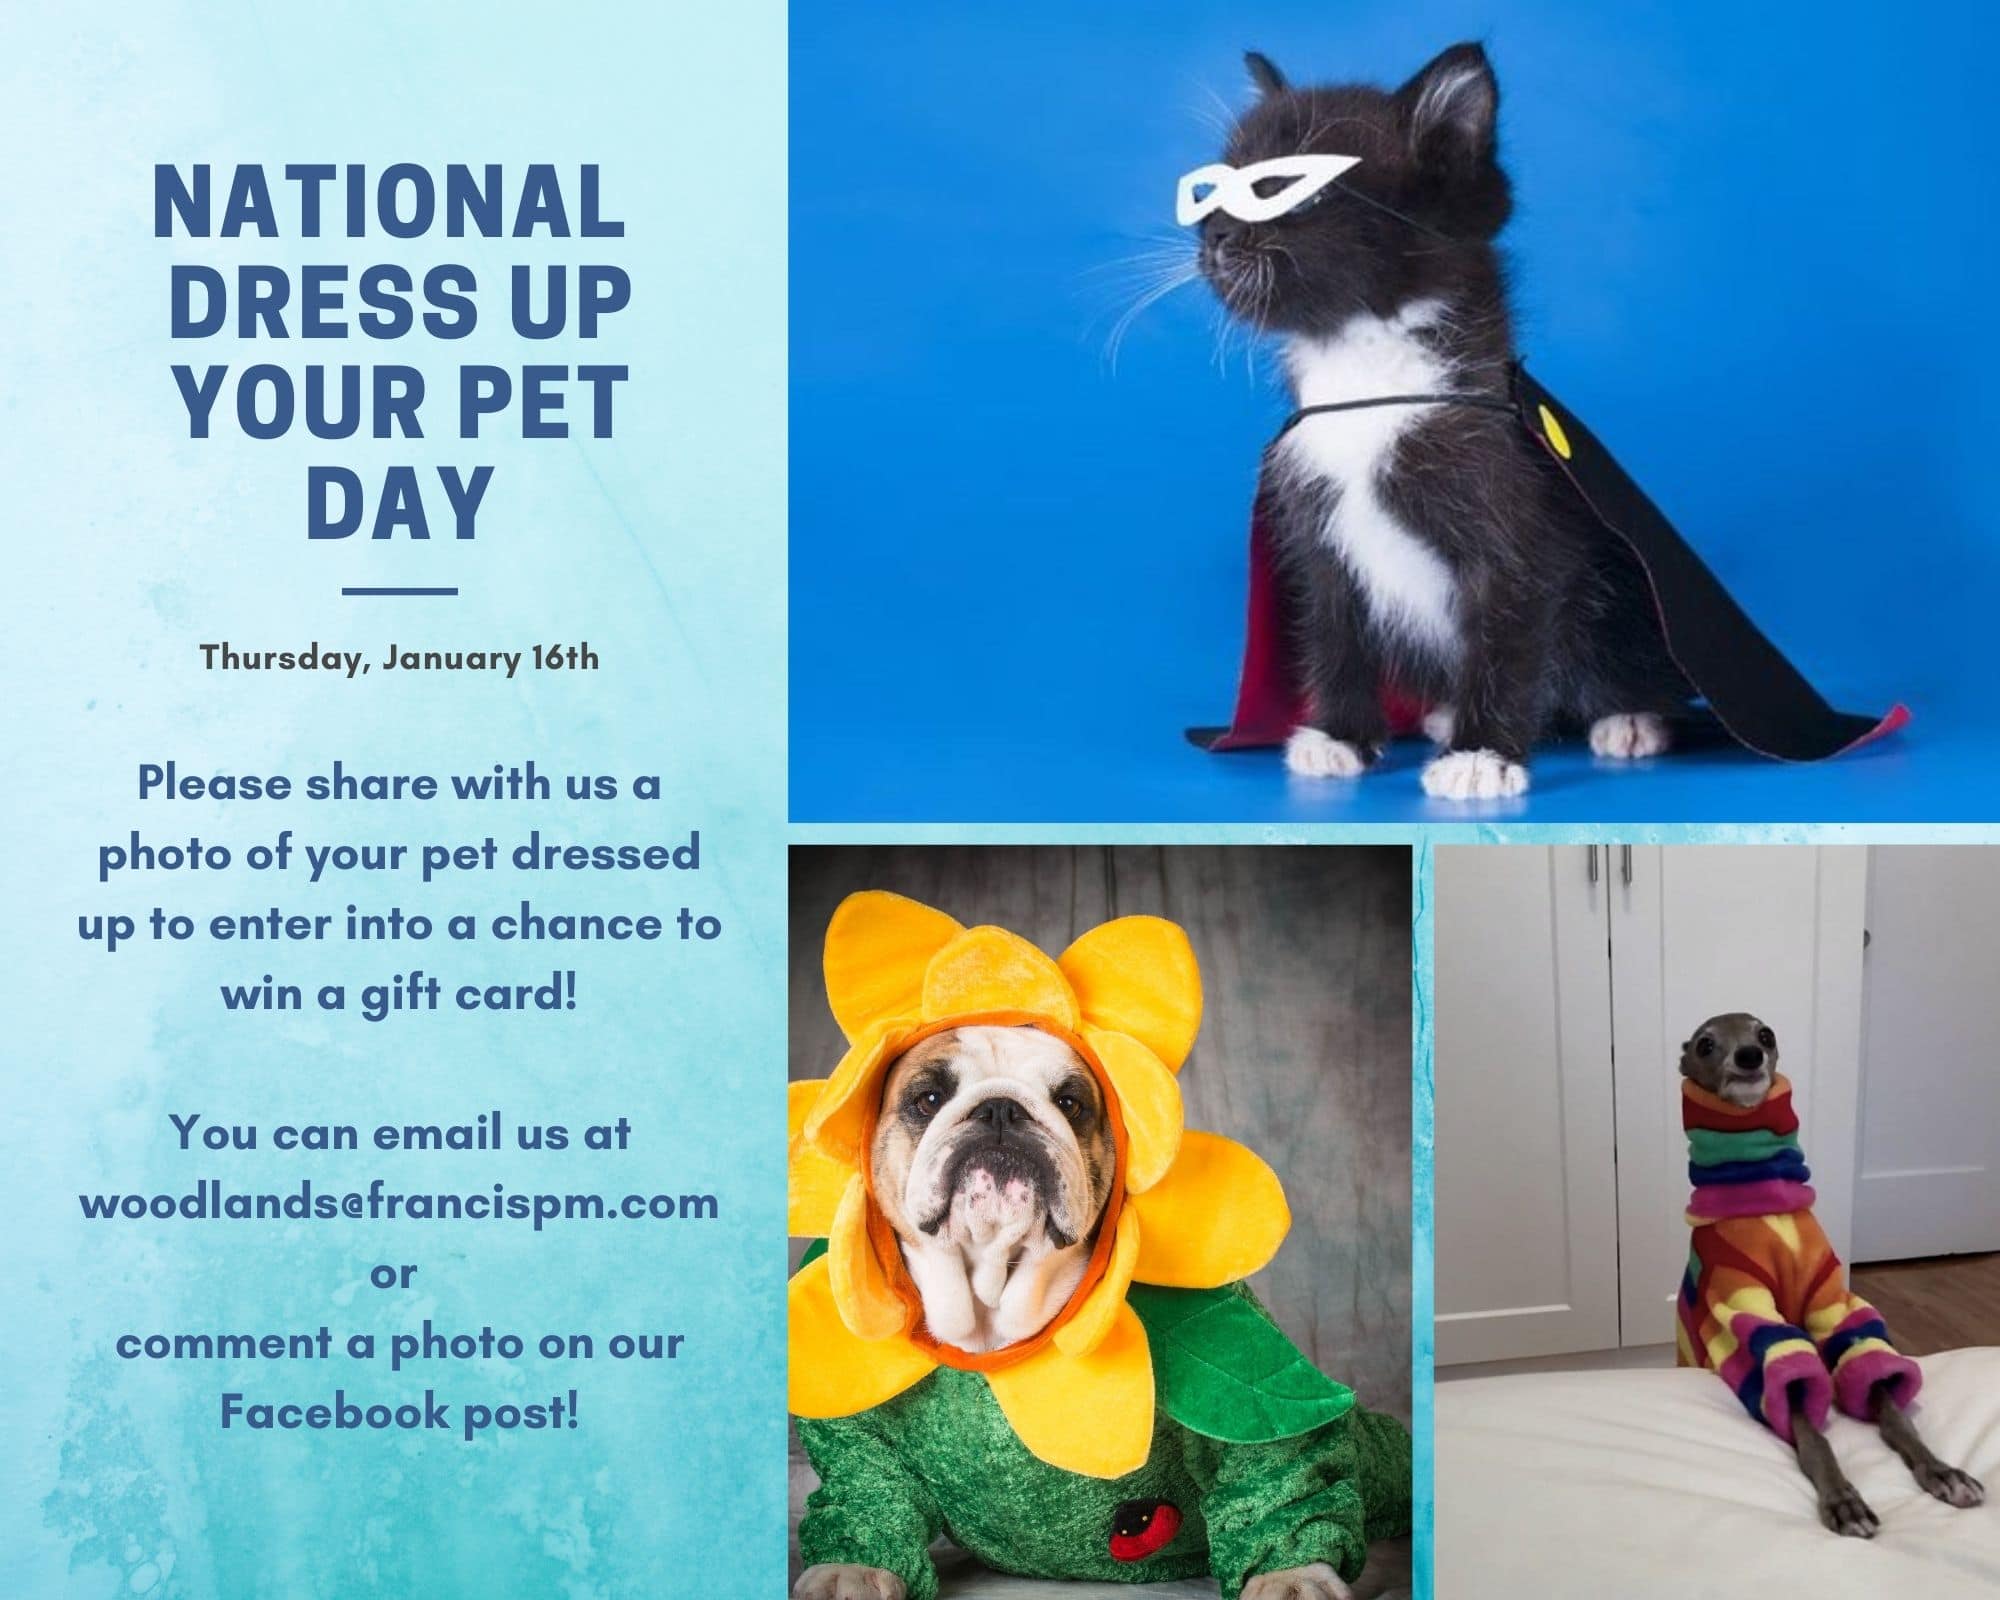 Join the celebration of National Dress Up Your Pet Day at our Apartments in The Woodlands TX!